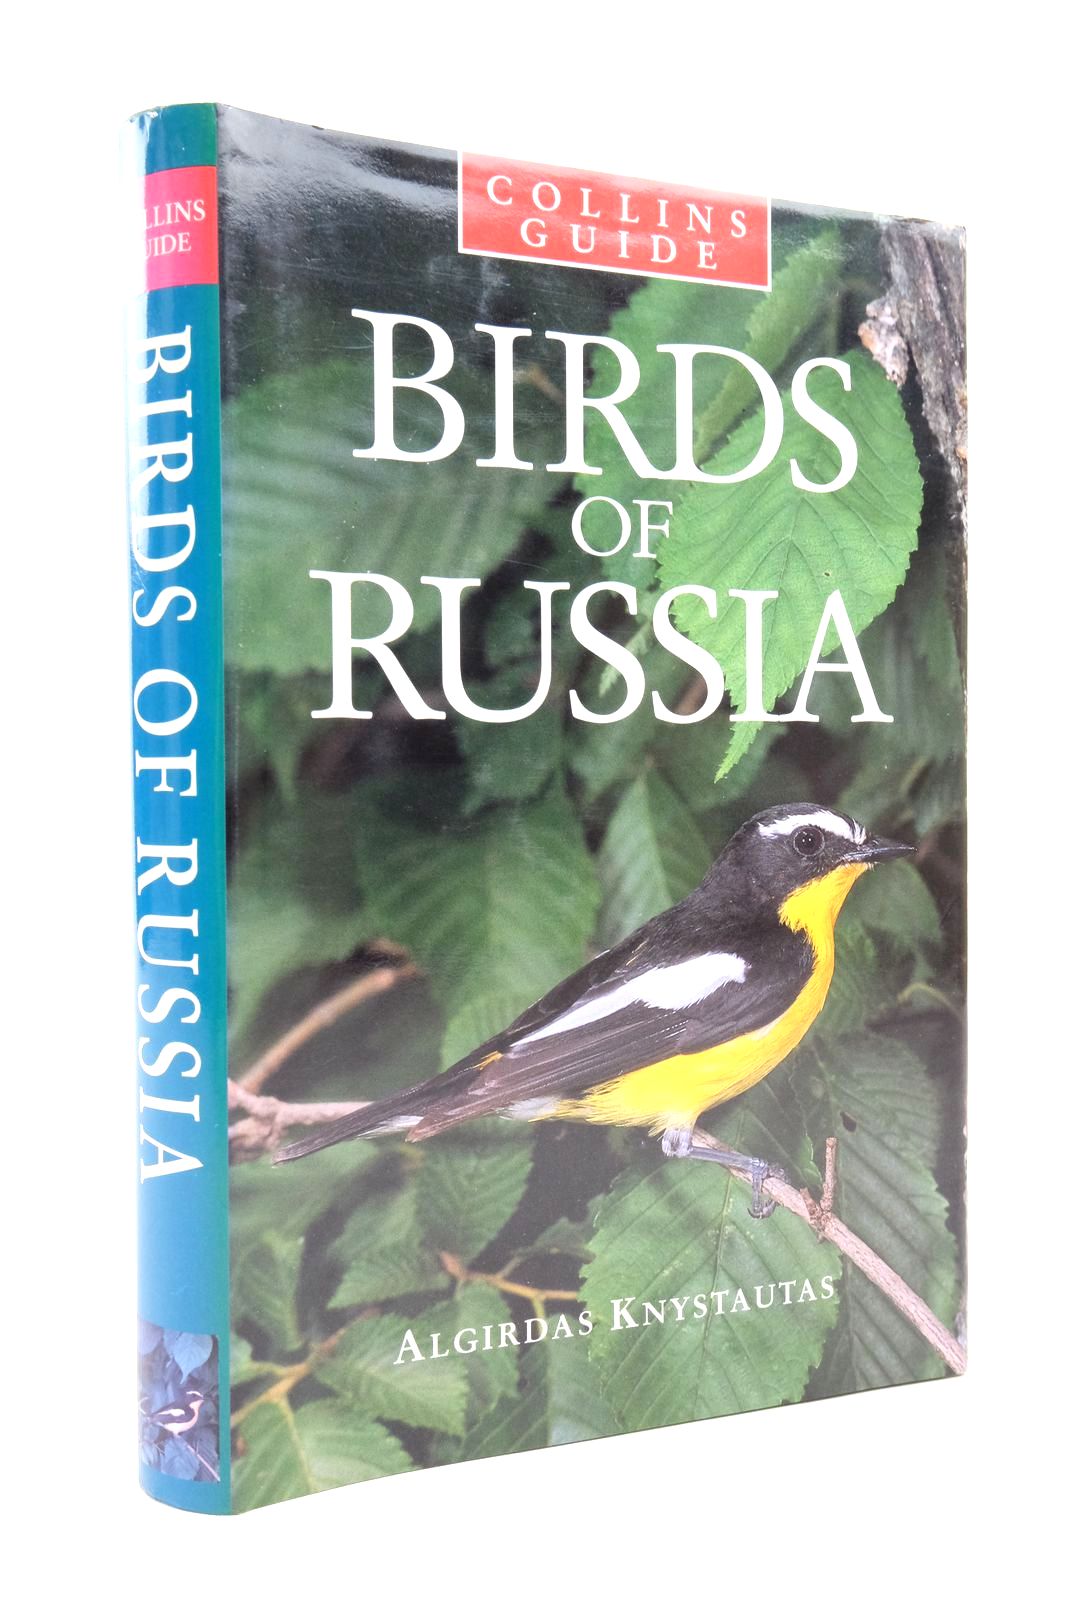 Photo of COLLINS GUIDE: BIRDS OF RUSSIA- Stock Number: 2137372